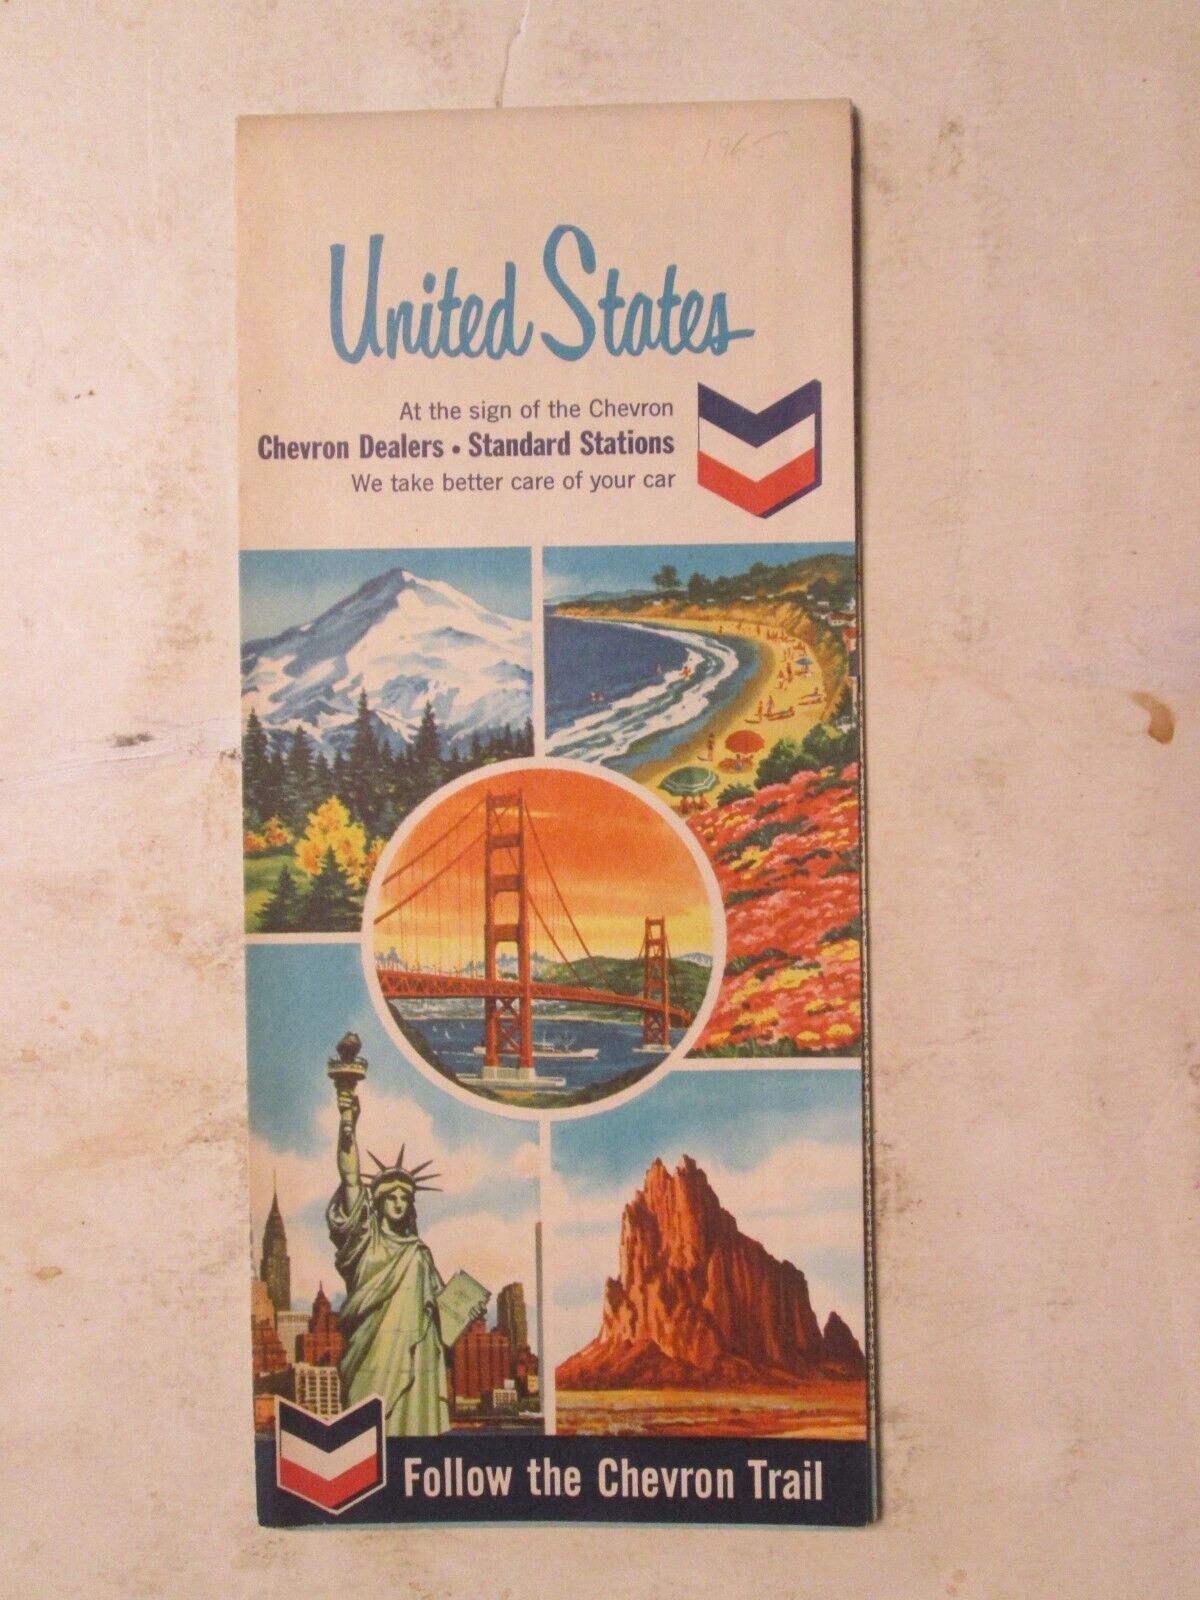 Chevron Highway Road Map of United States 1965